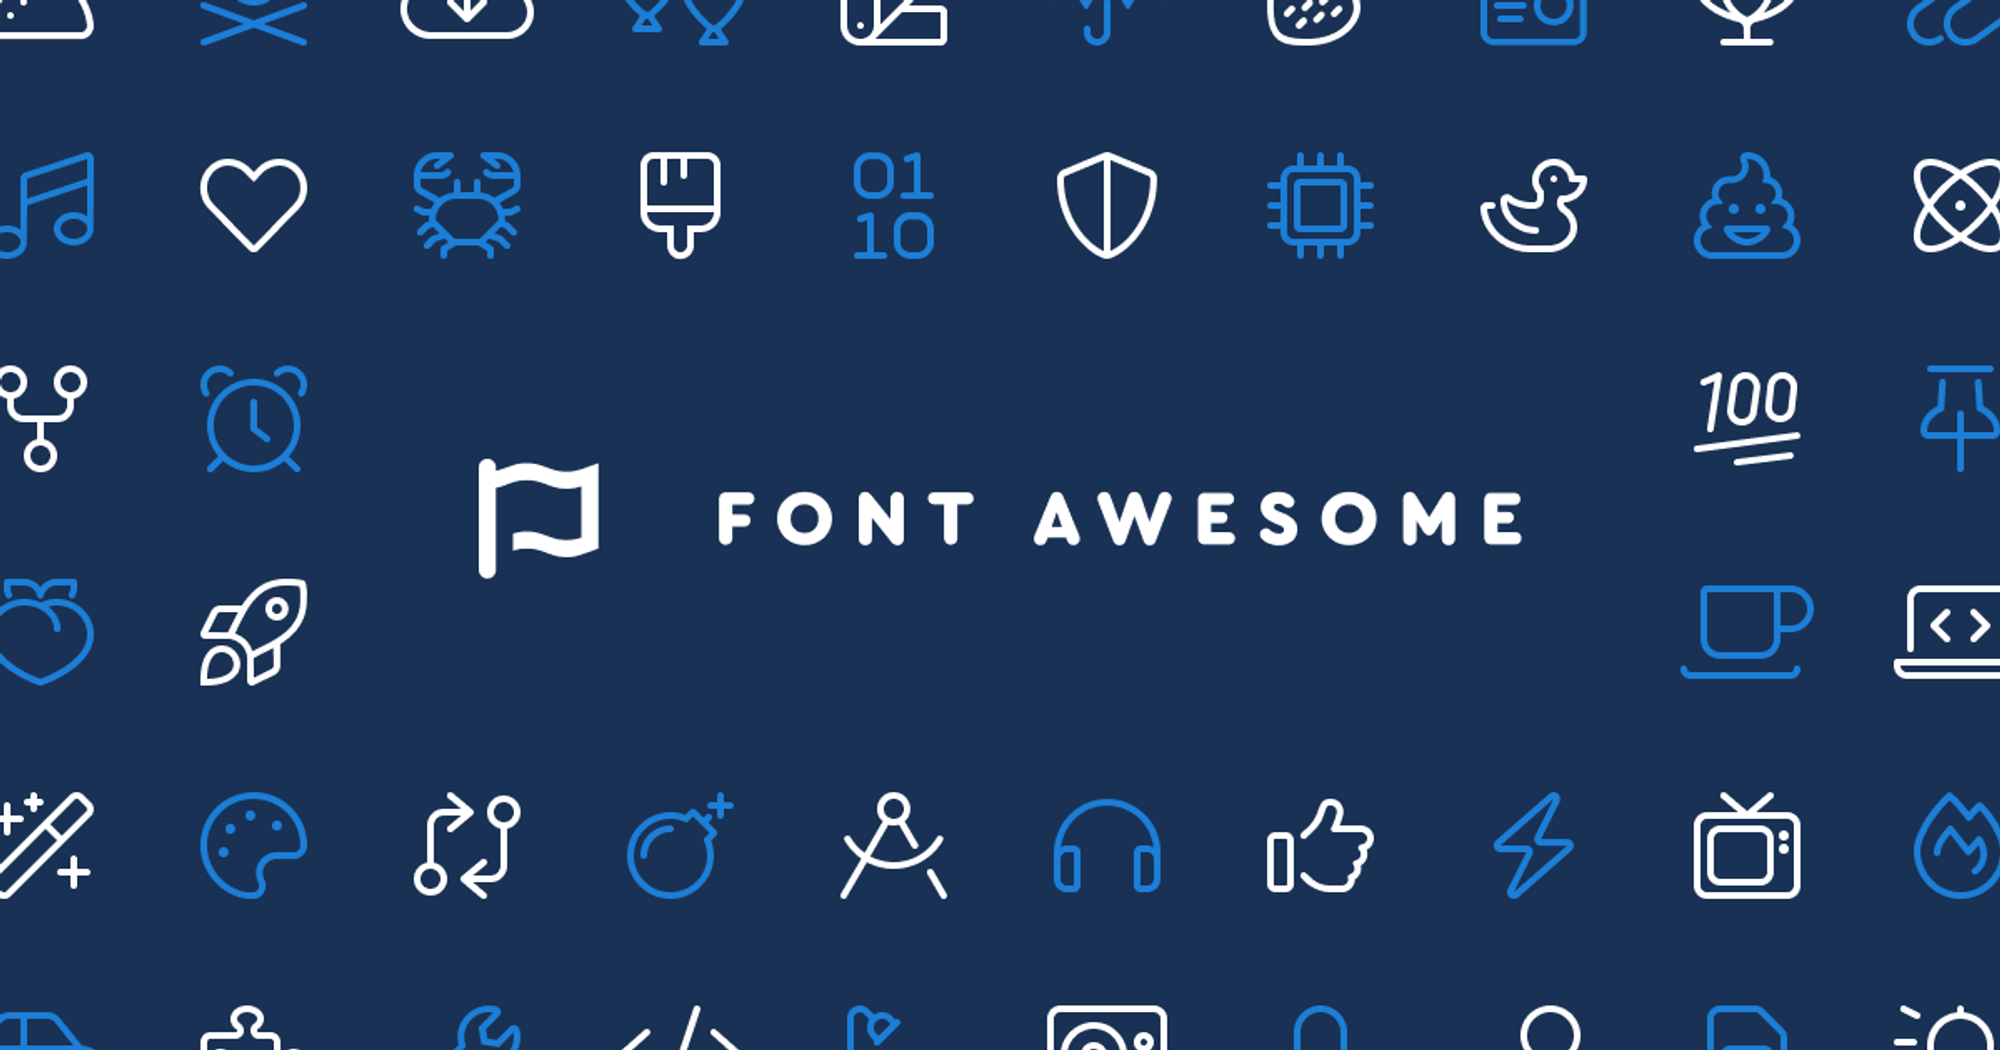 Search v5 Icons | Font Awesome